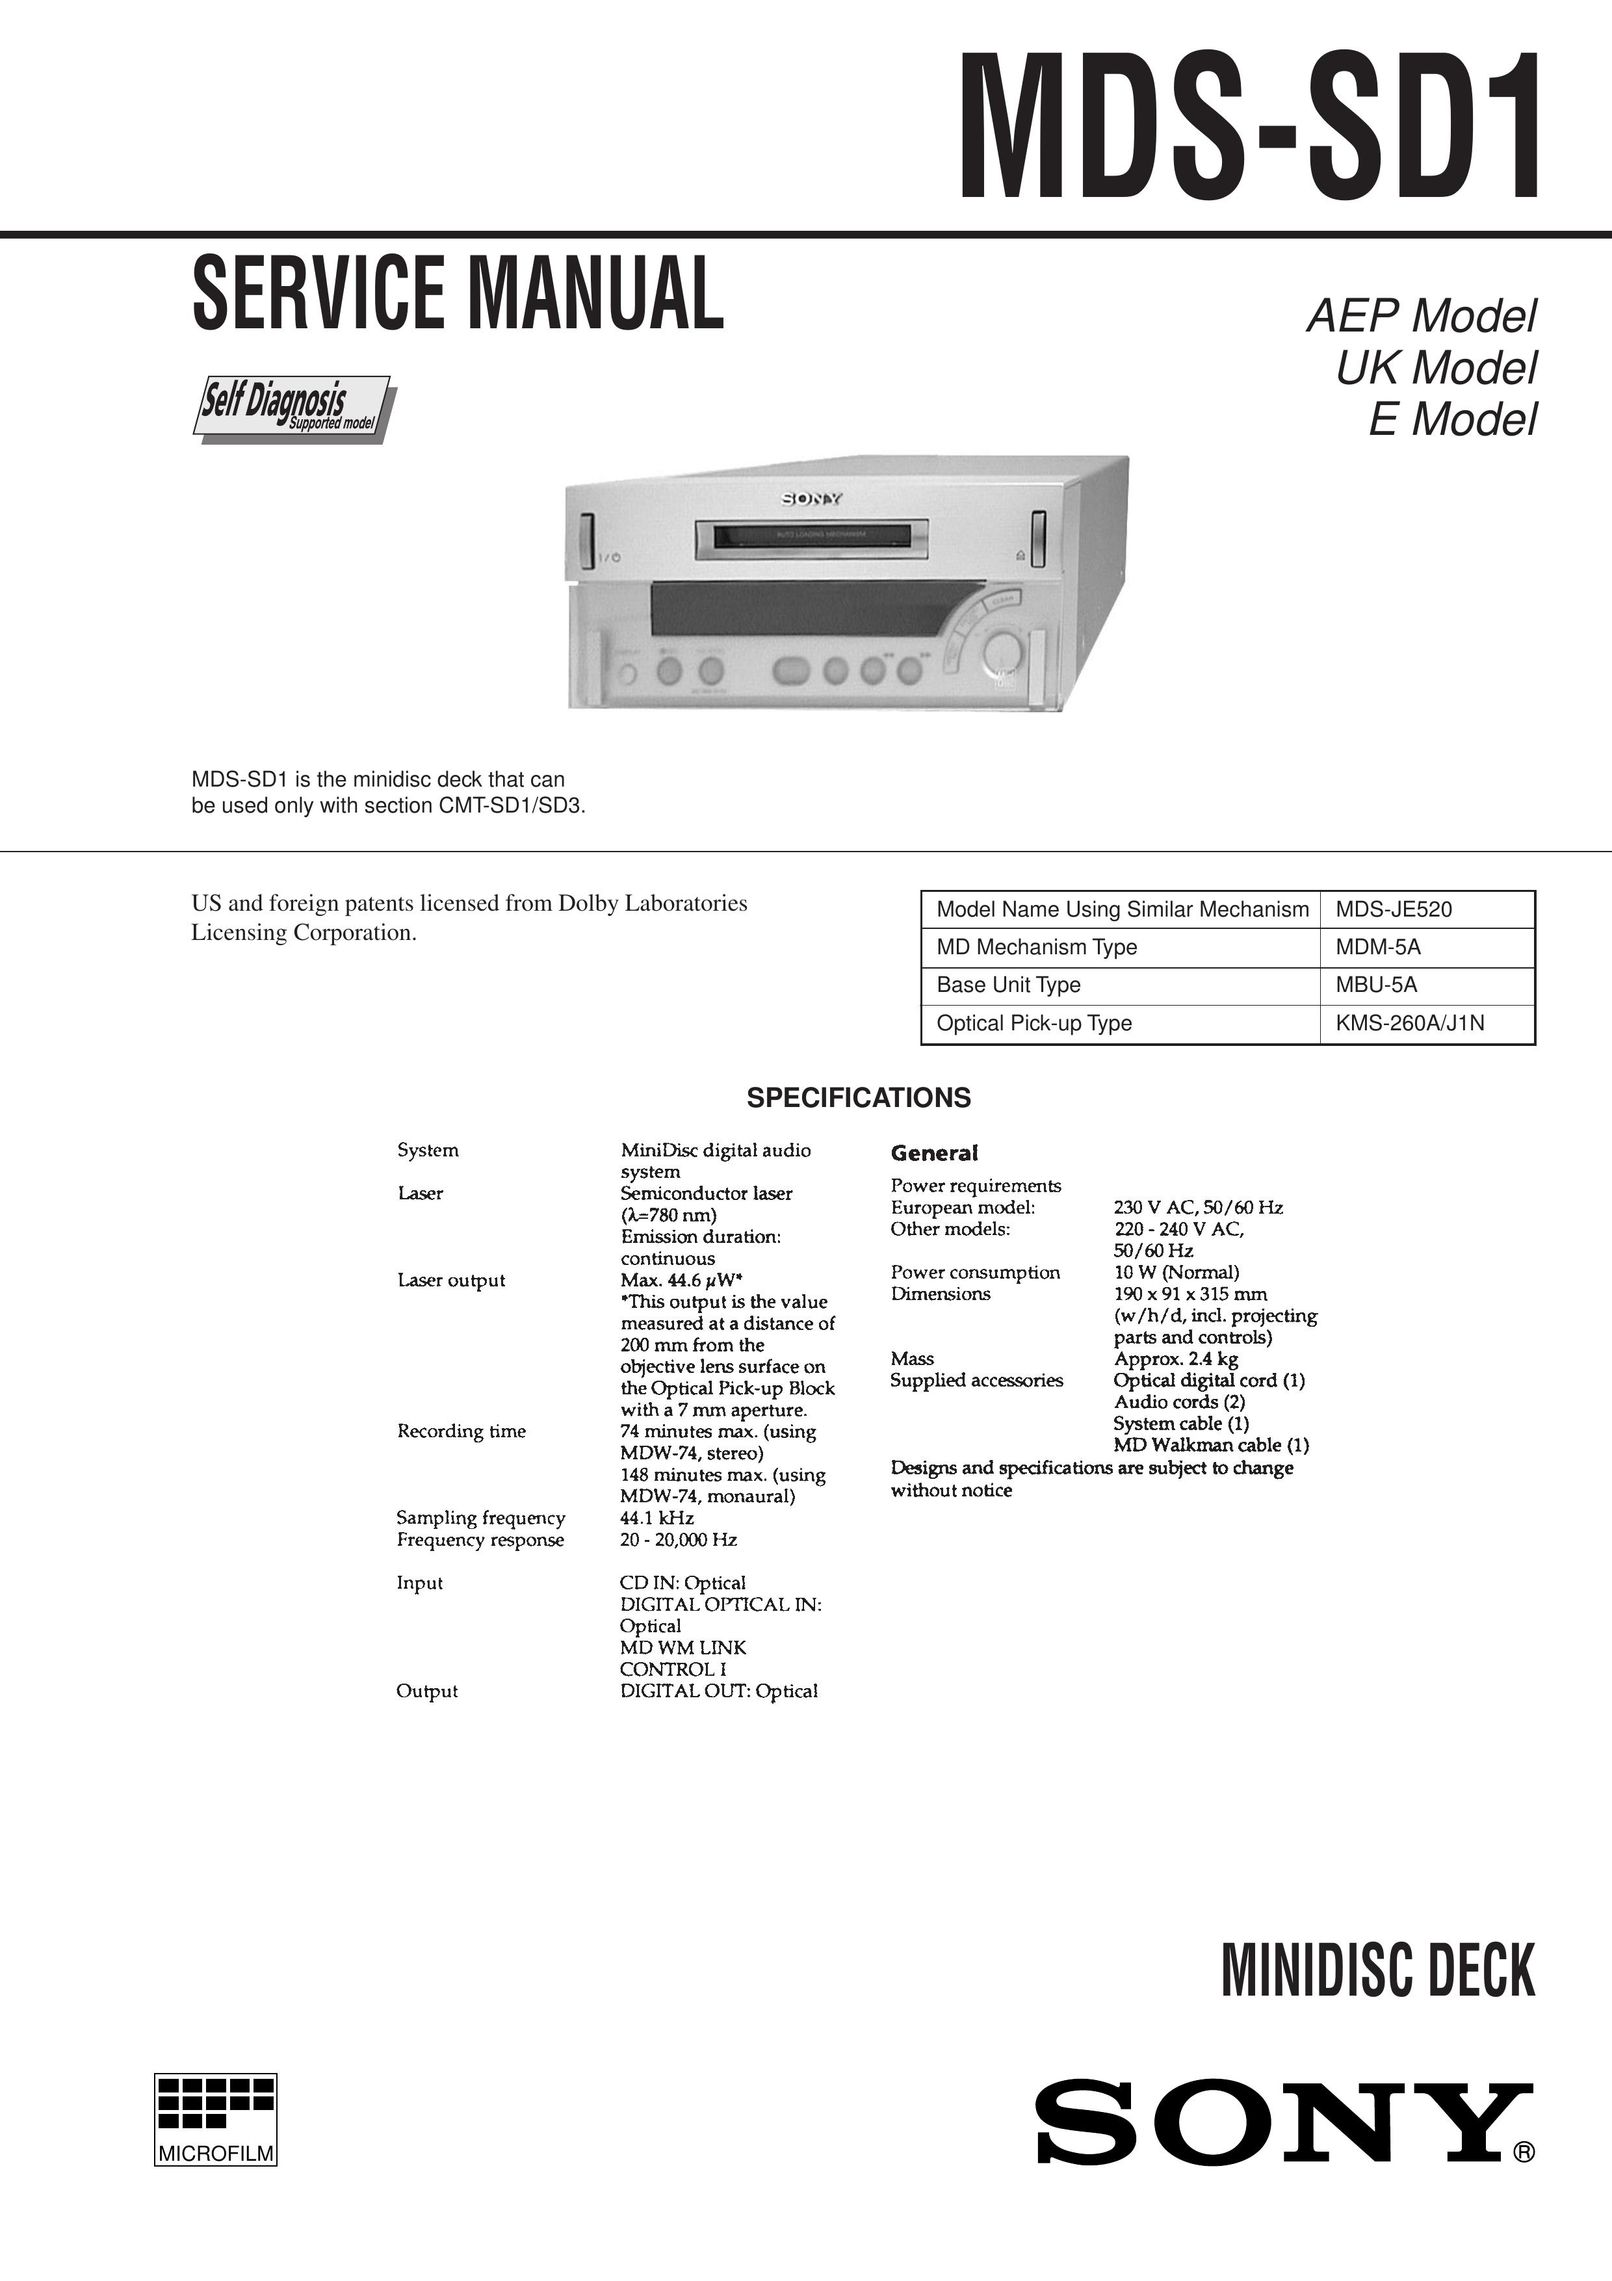 Sony MDS-SD1 MiniDisc Player User Manual